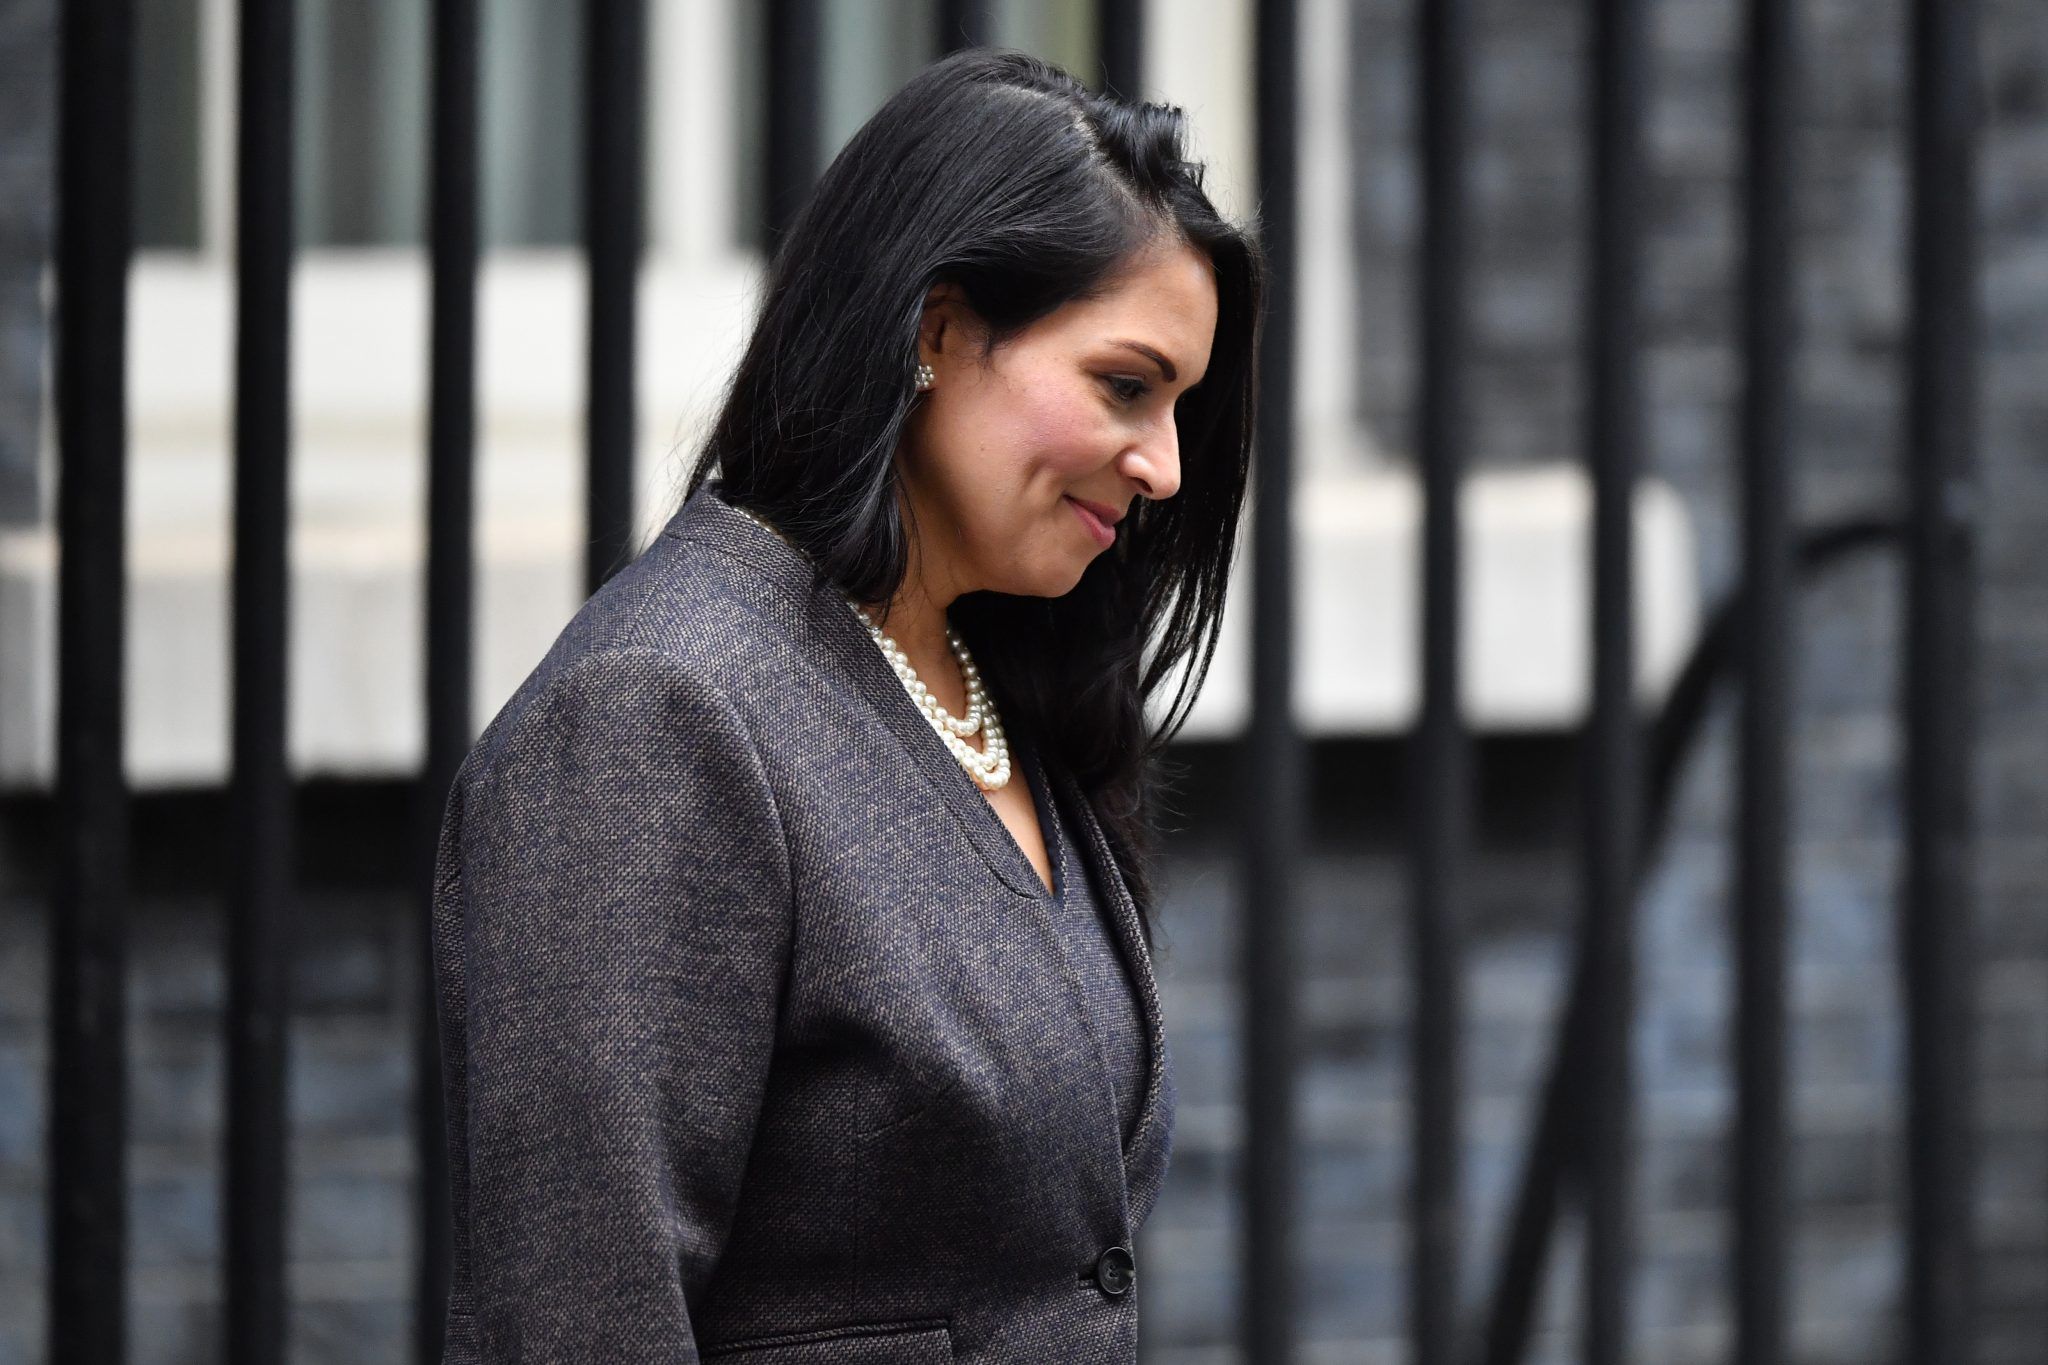 Priti Patel looking down smiling while leaving Number 10 Downing Street